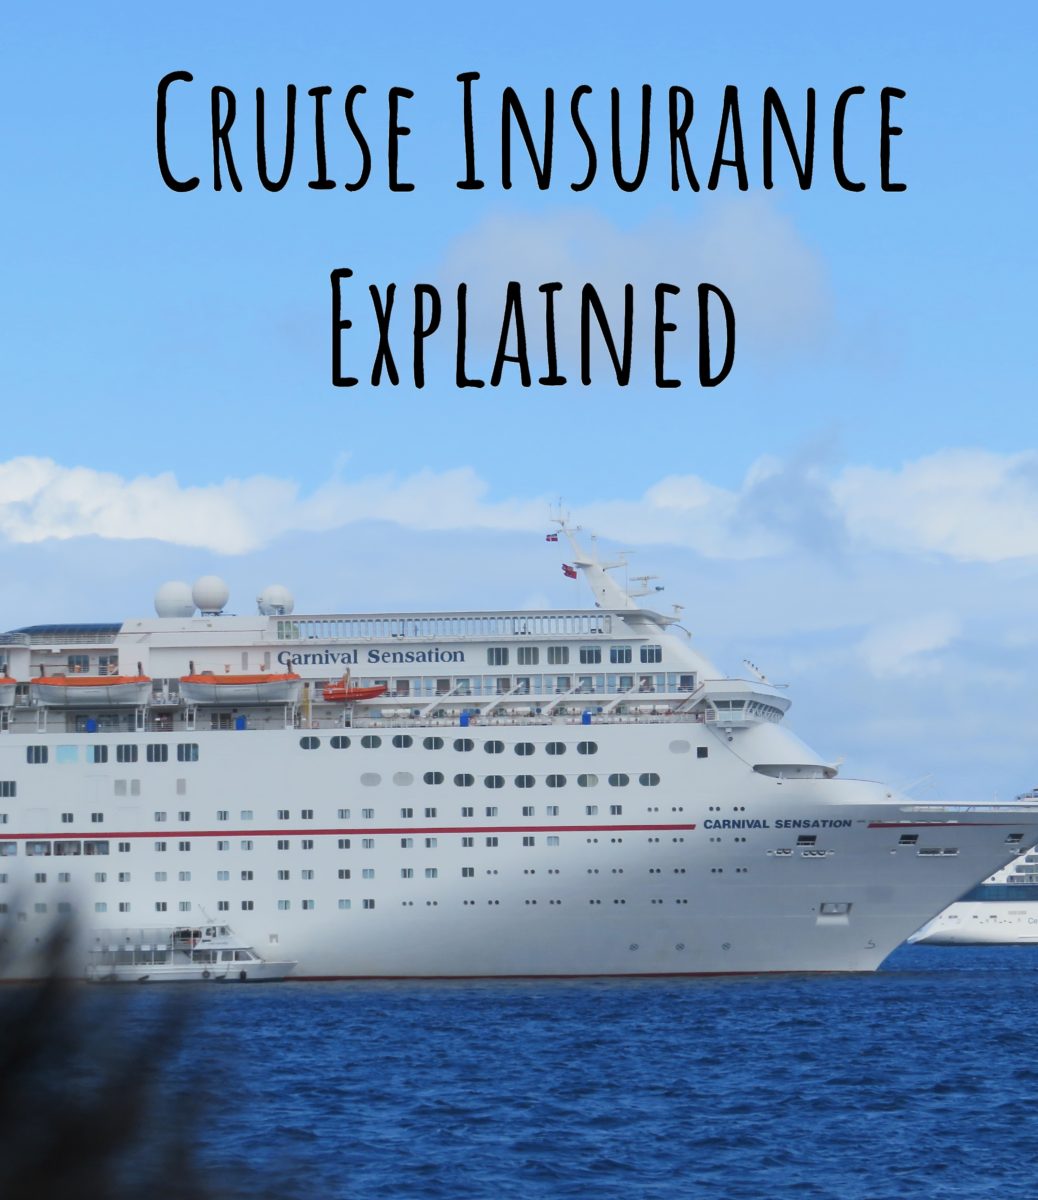 cruise ship covered by insurance